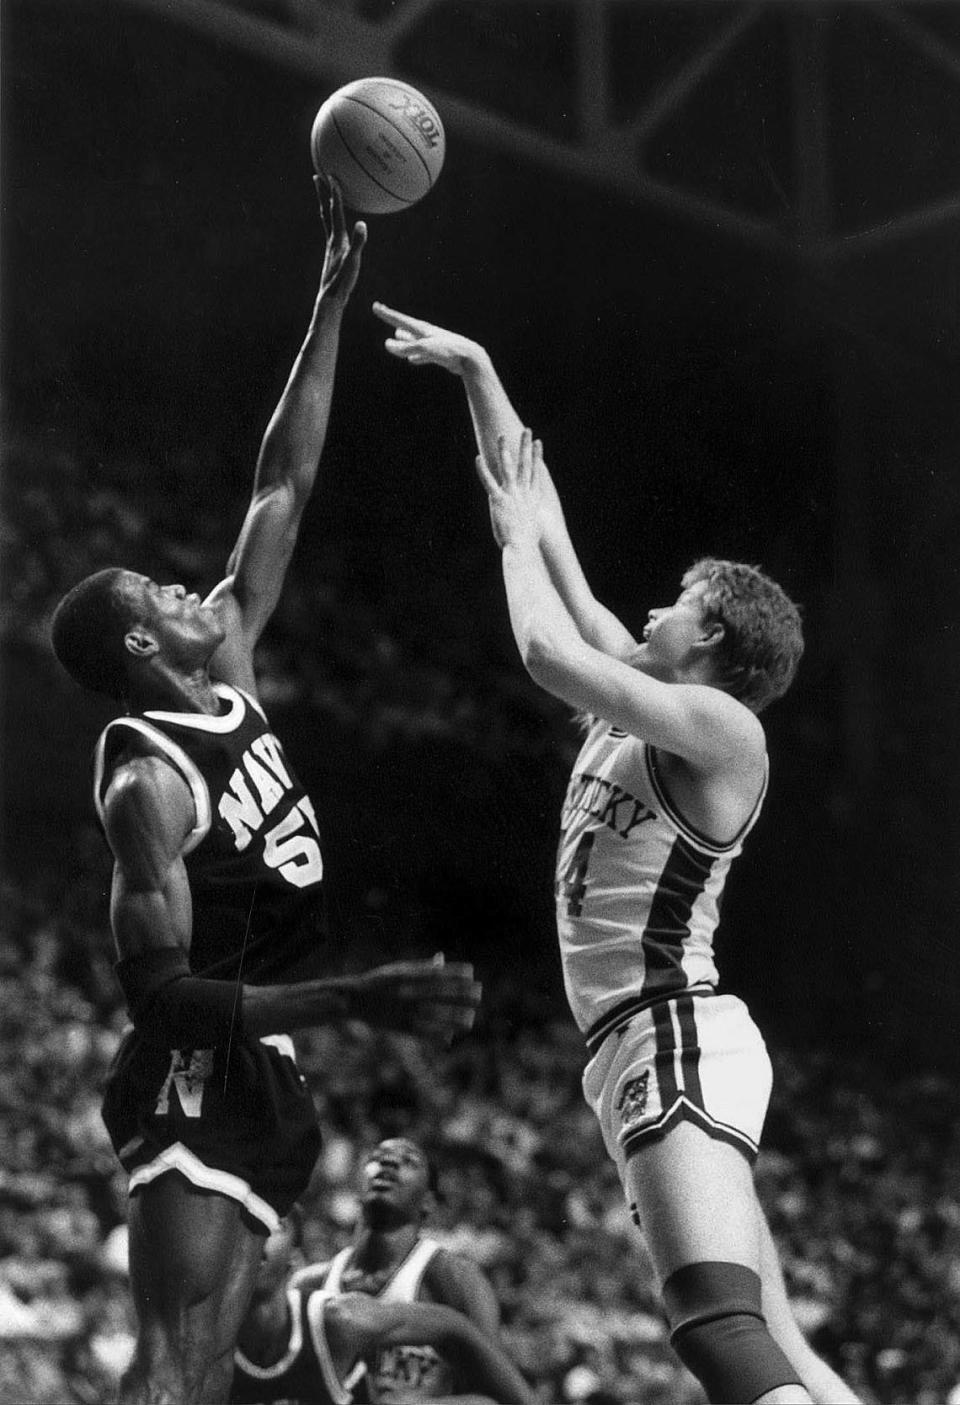 In what was the finest performance by a college player in Rupp Arena history, Navy’s David Robinson, left, had a triple-double with 45 points, 14 rebounds and 10 blocked shots in the Midshipmen’s 80-69 loss to Kentucky on Jan. 25, 1987. When Robinson departed the game, he received a standing ovation from the crowd, including then-UK coach Eddie Sutton and television analyst Dick Vitale.